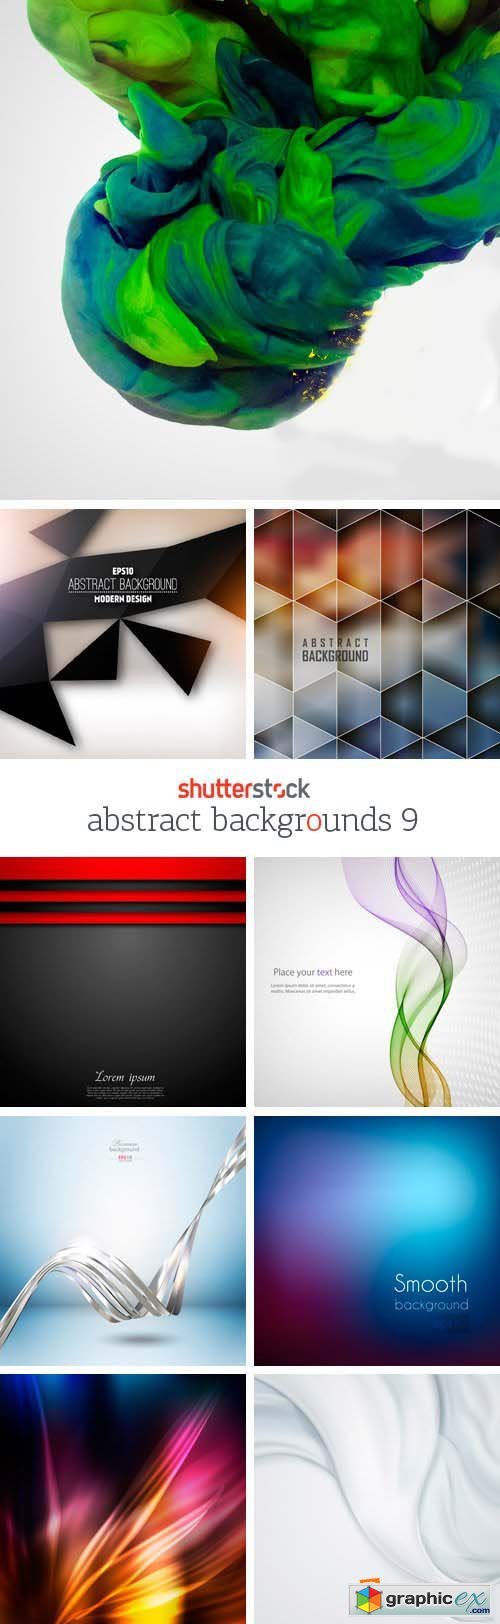 Amazing SS - Abstract Backgrounds 9, 25xEPS